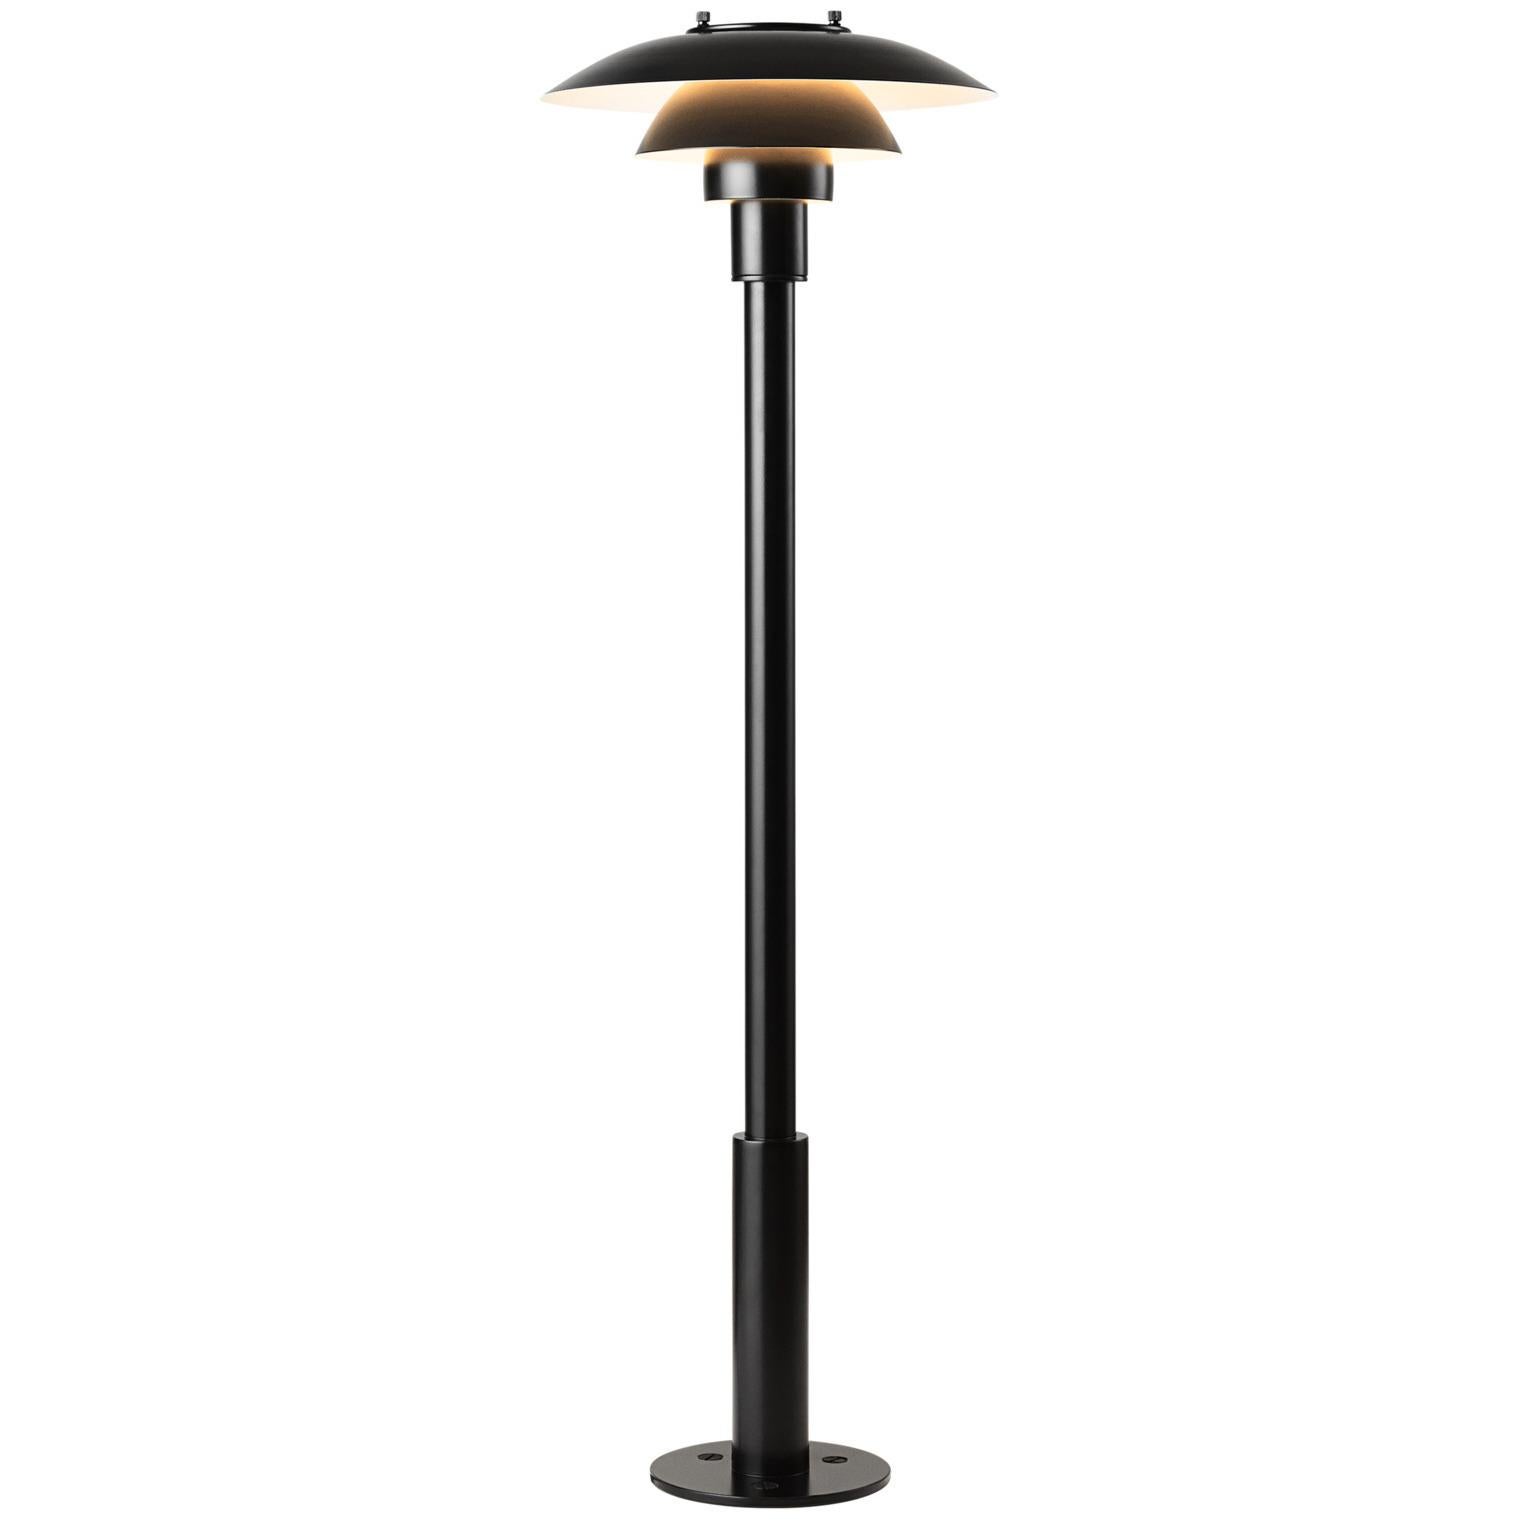 Poul Henningsen PH 3-2 1/2 outdoor bollard for Louis Poulsen. Based on Poul Henningsen's revolutionary reflective three-shade system, which directs the majority of the light downward. Mounted on a stepped stem, it is ideal for gardens and other